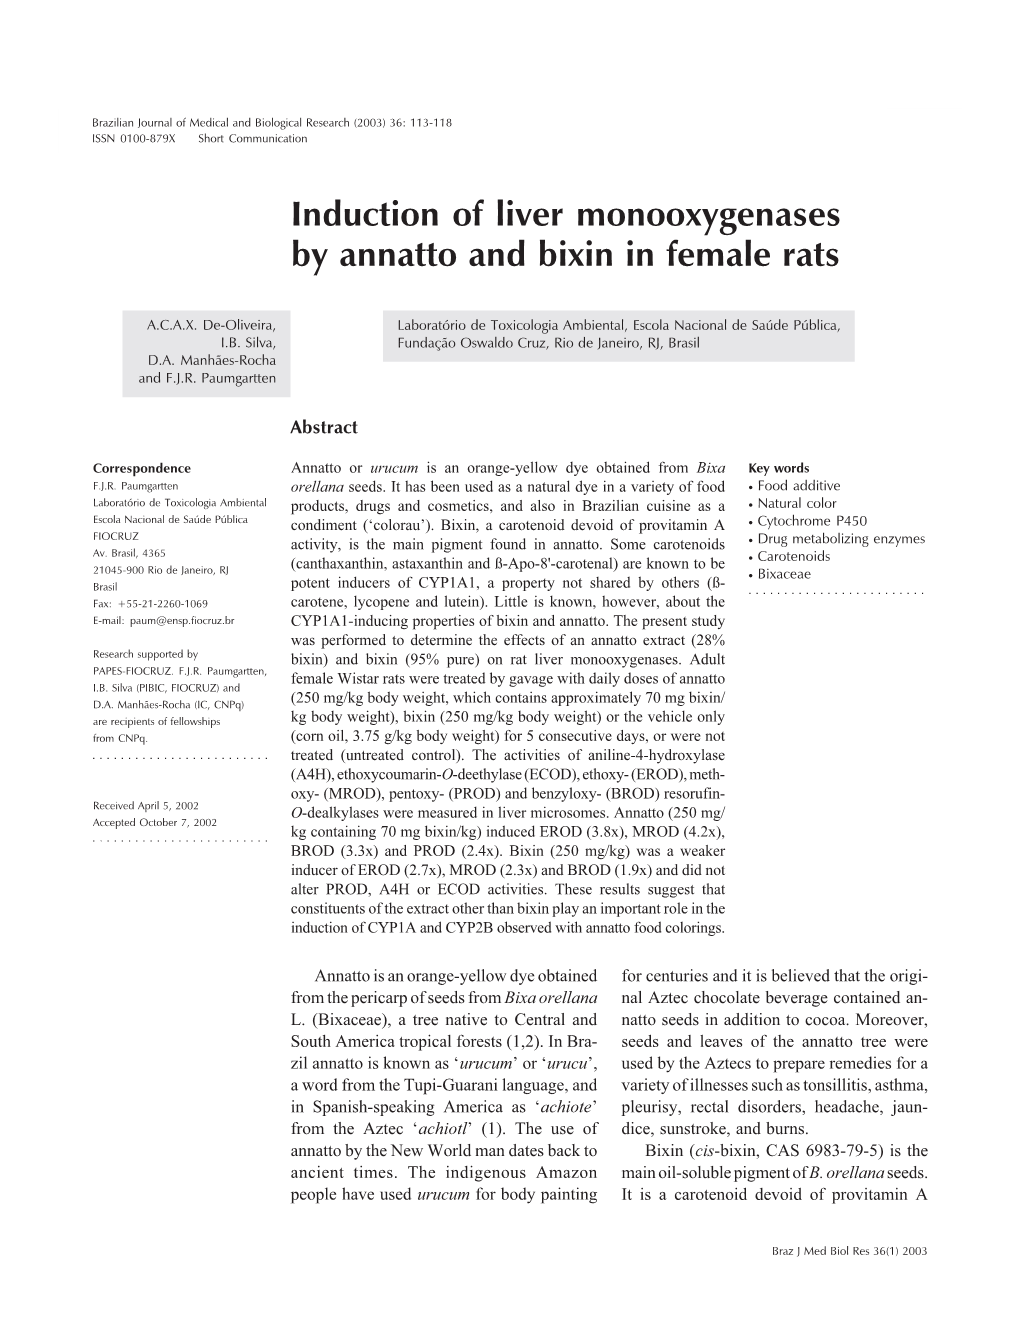 Induction of Liver Monooxygenases by Annatto and Bixin in Female Rats